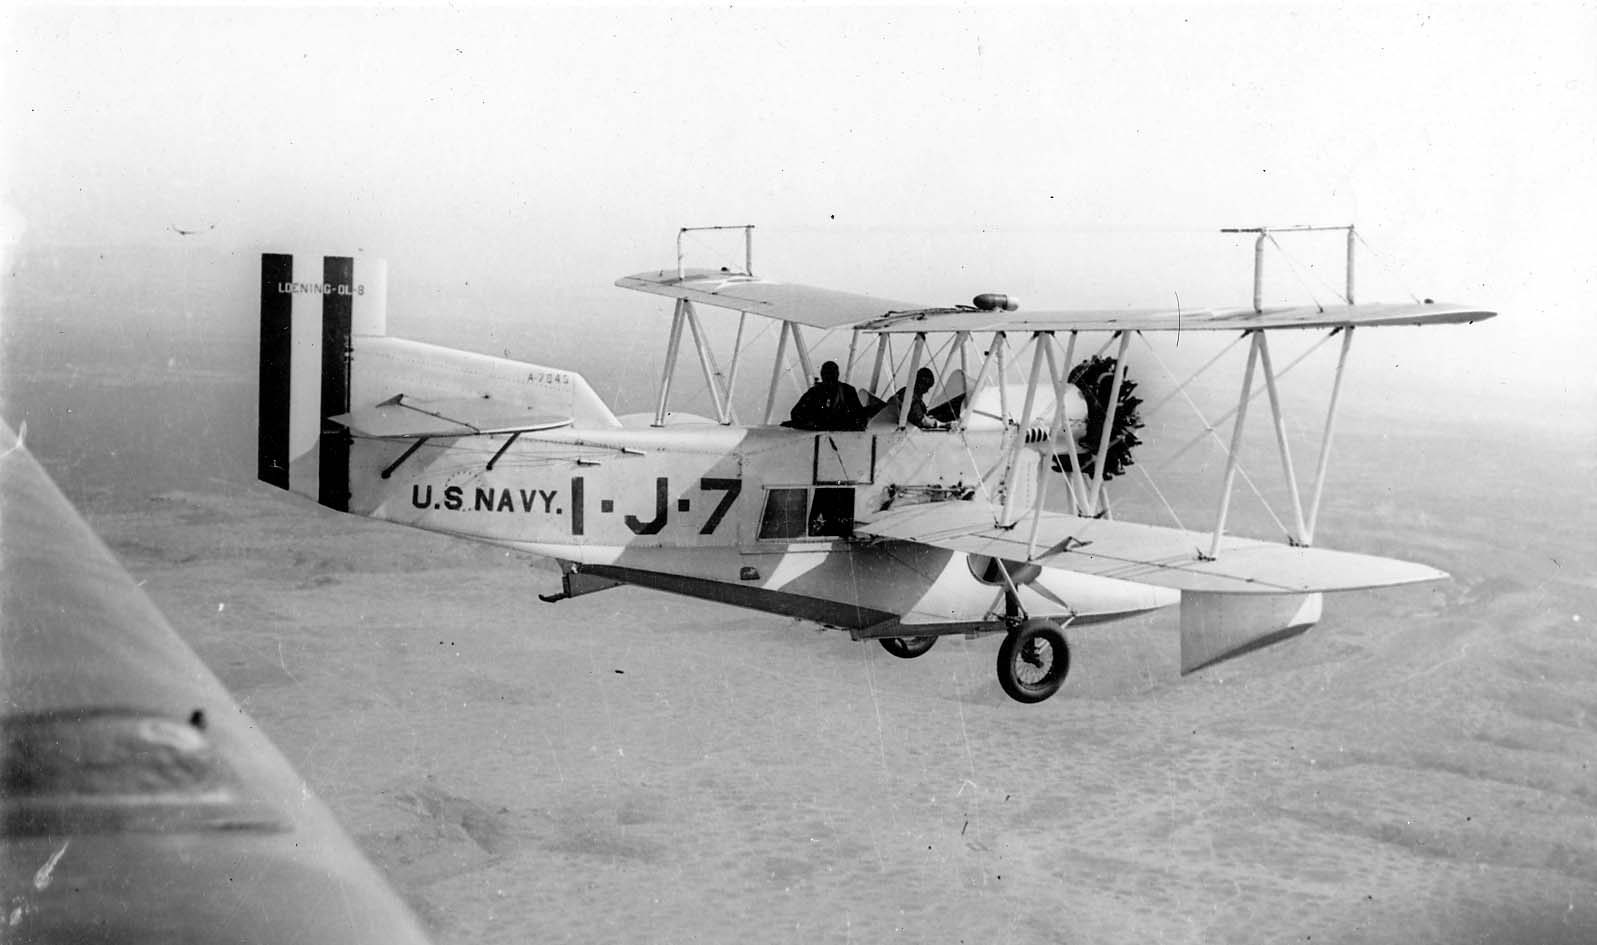 Black and White vintage photograph of US Navy aircraft in flight over San Diego, California. Airplane is Loening OL Amphibian which is an American two-seat amphibious biplane.